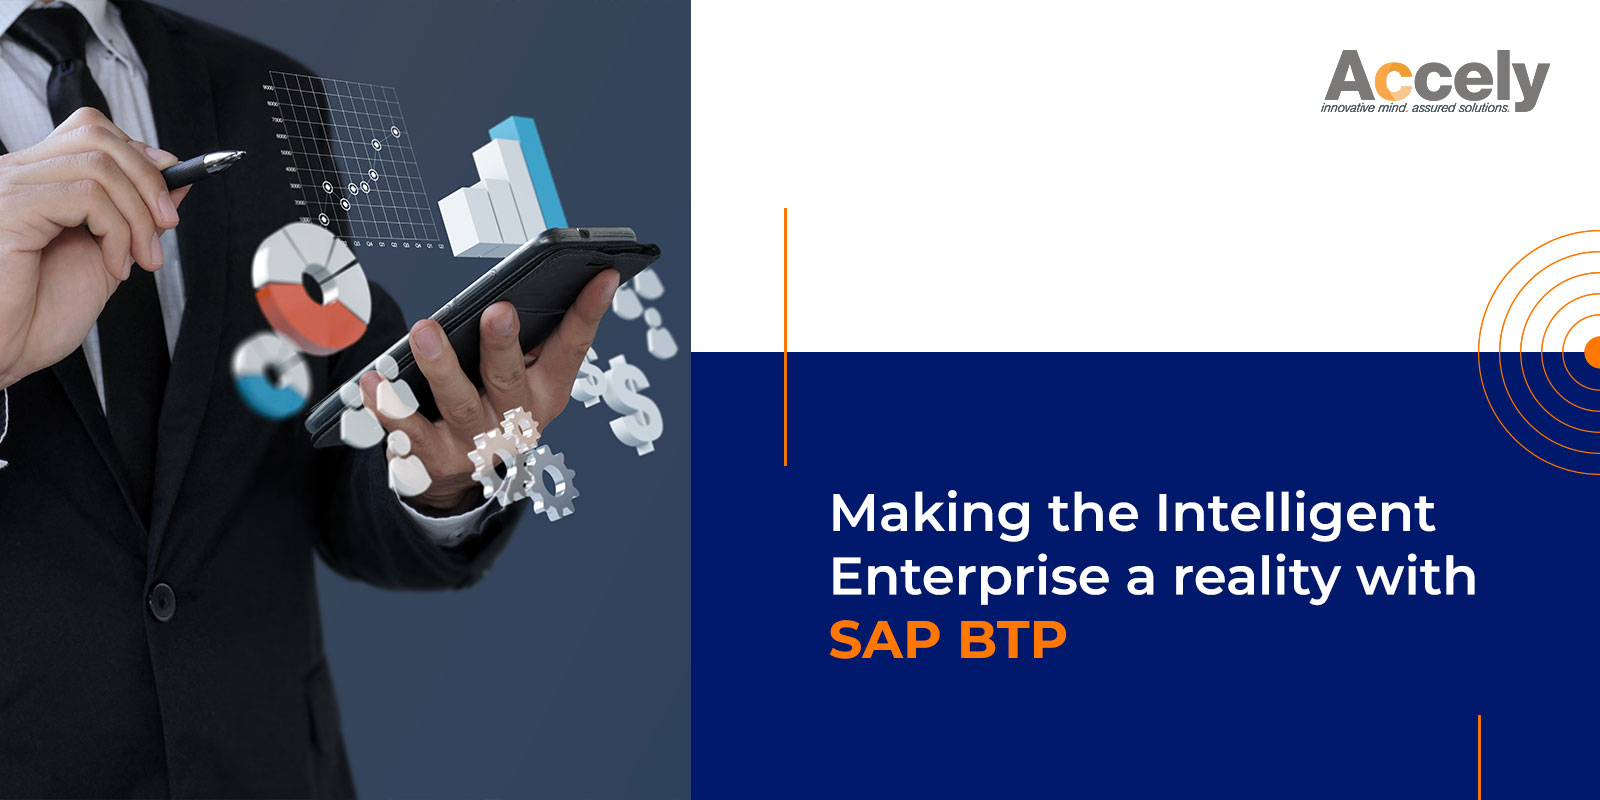 Making the Intelligent Enterprise a reality with SAP BTP